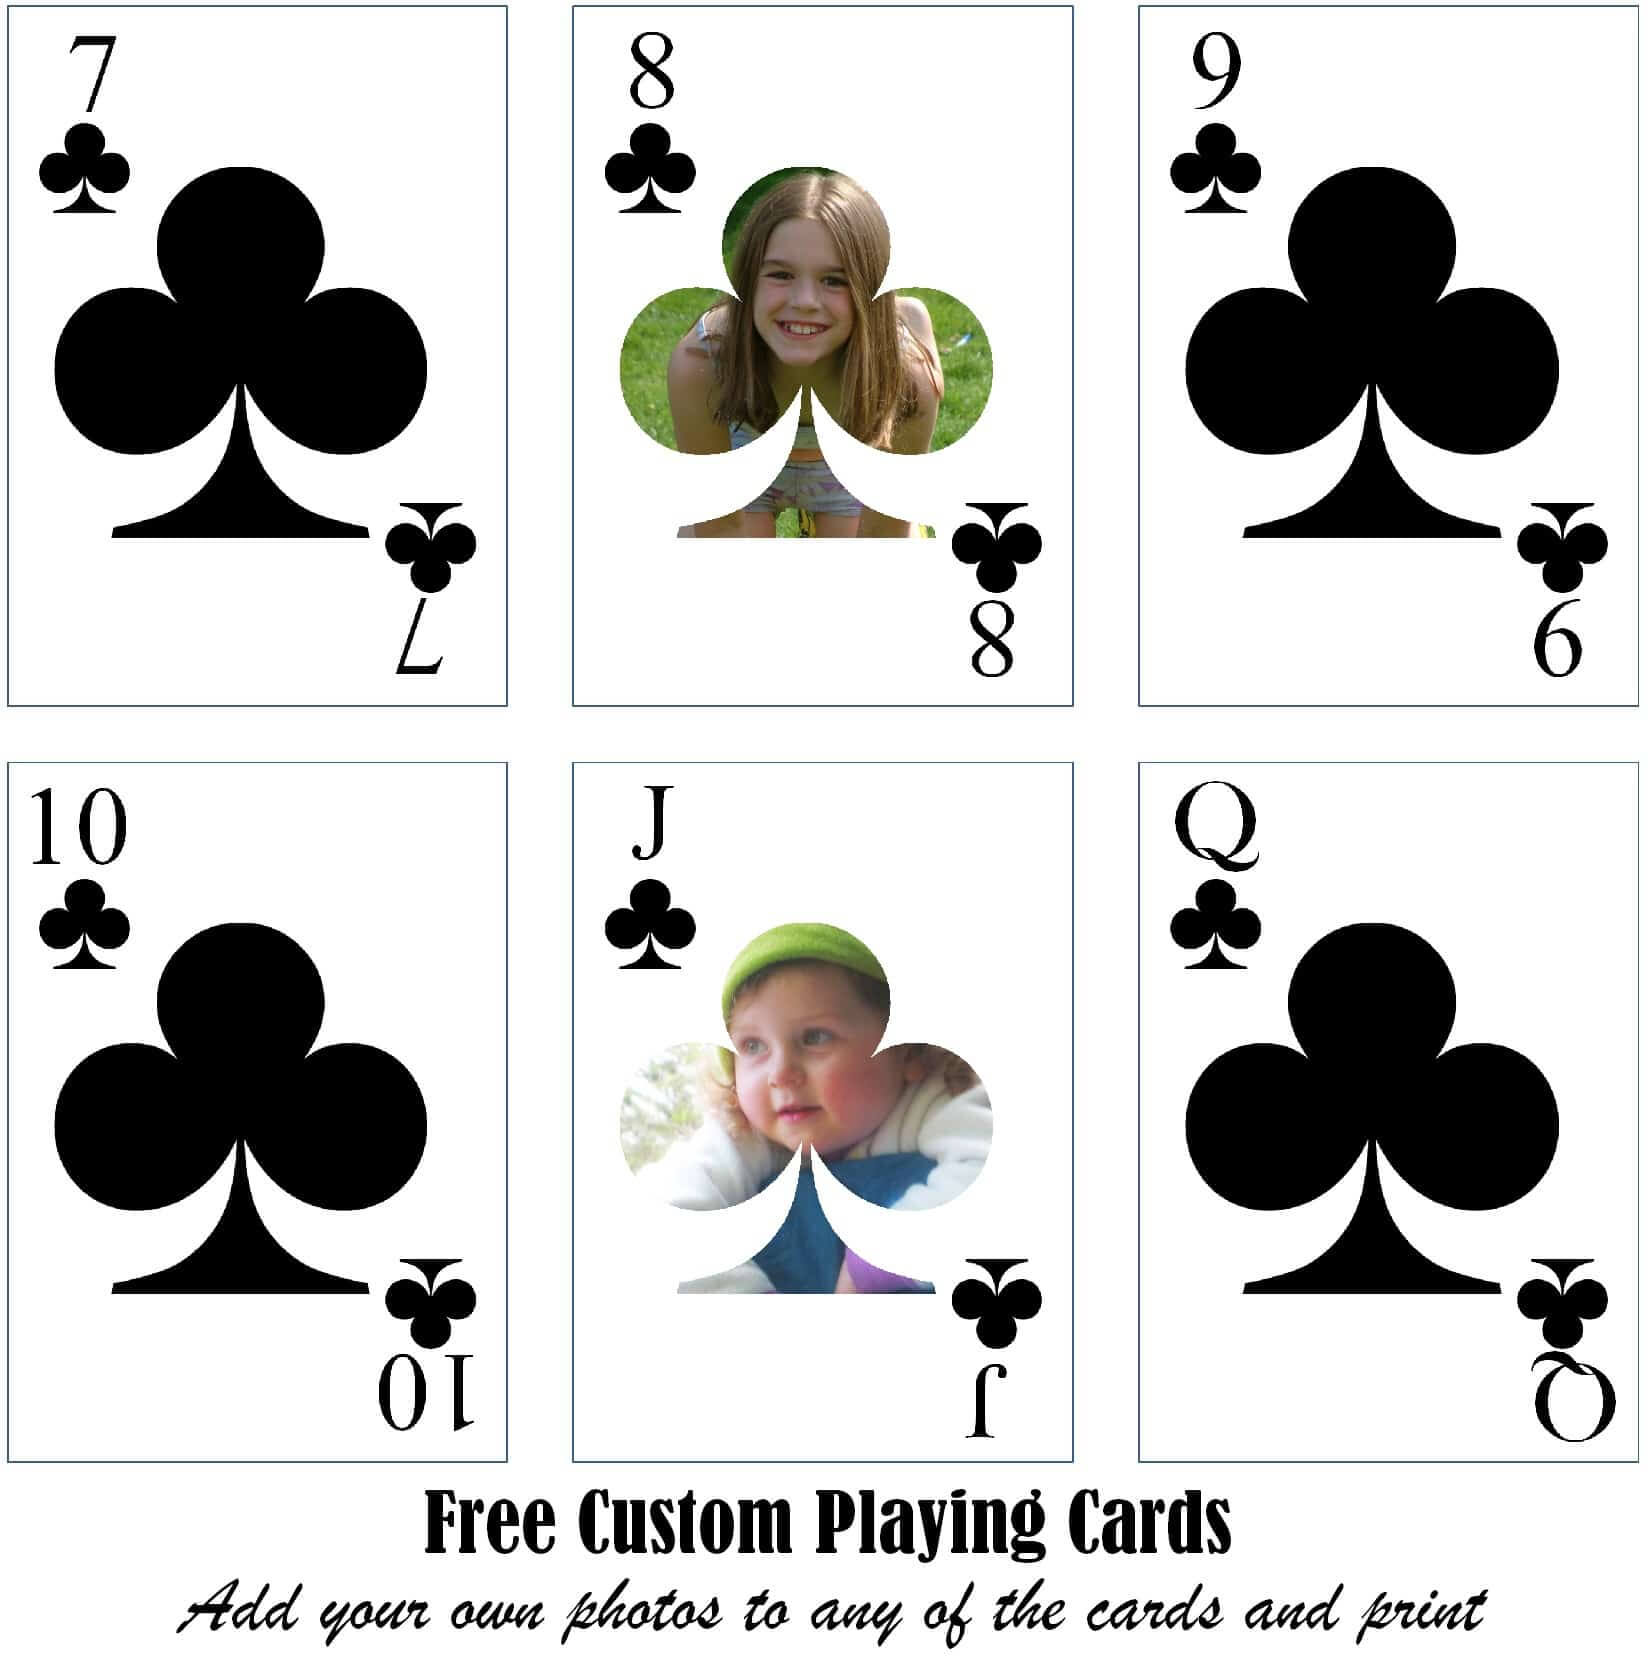 Free Printable Custom Playing Cards Add Your Photo And/or Text Inside